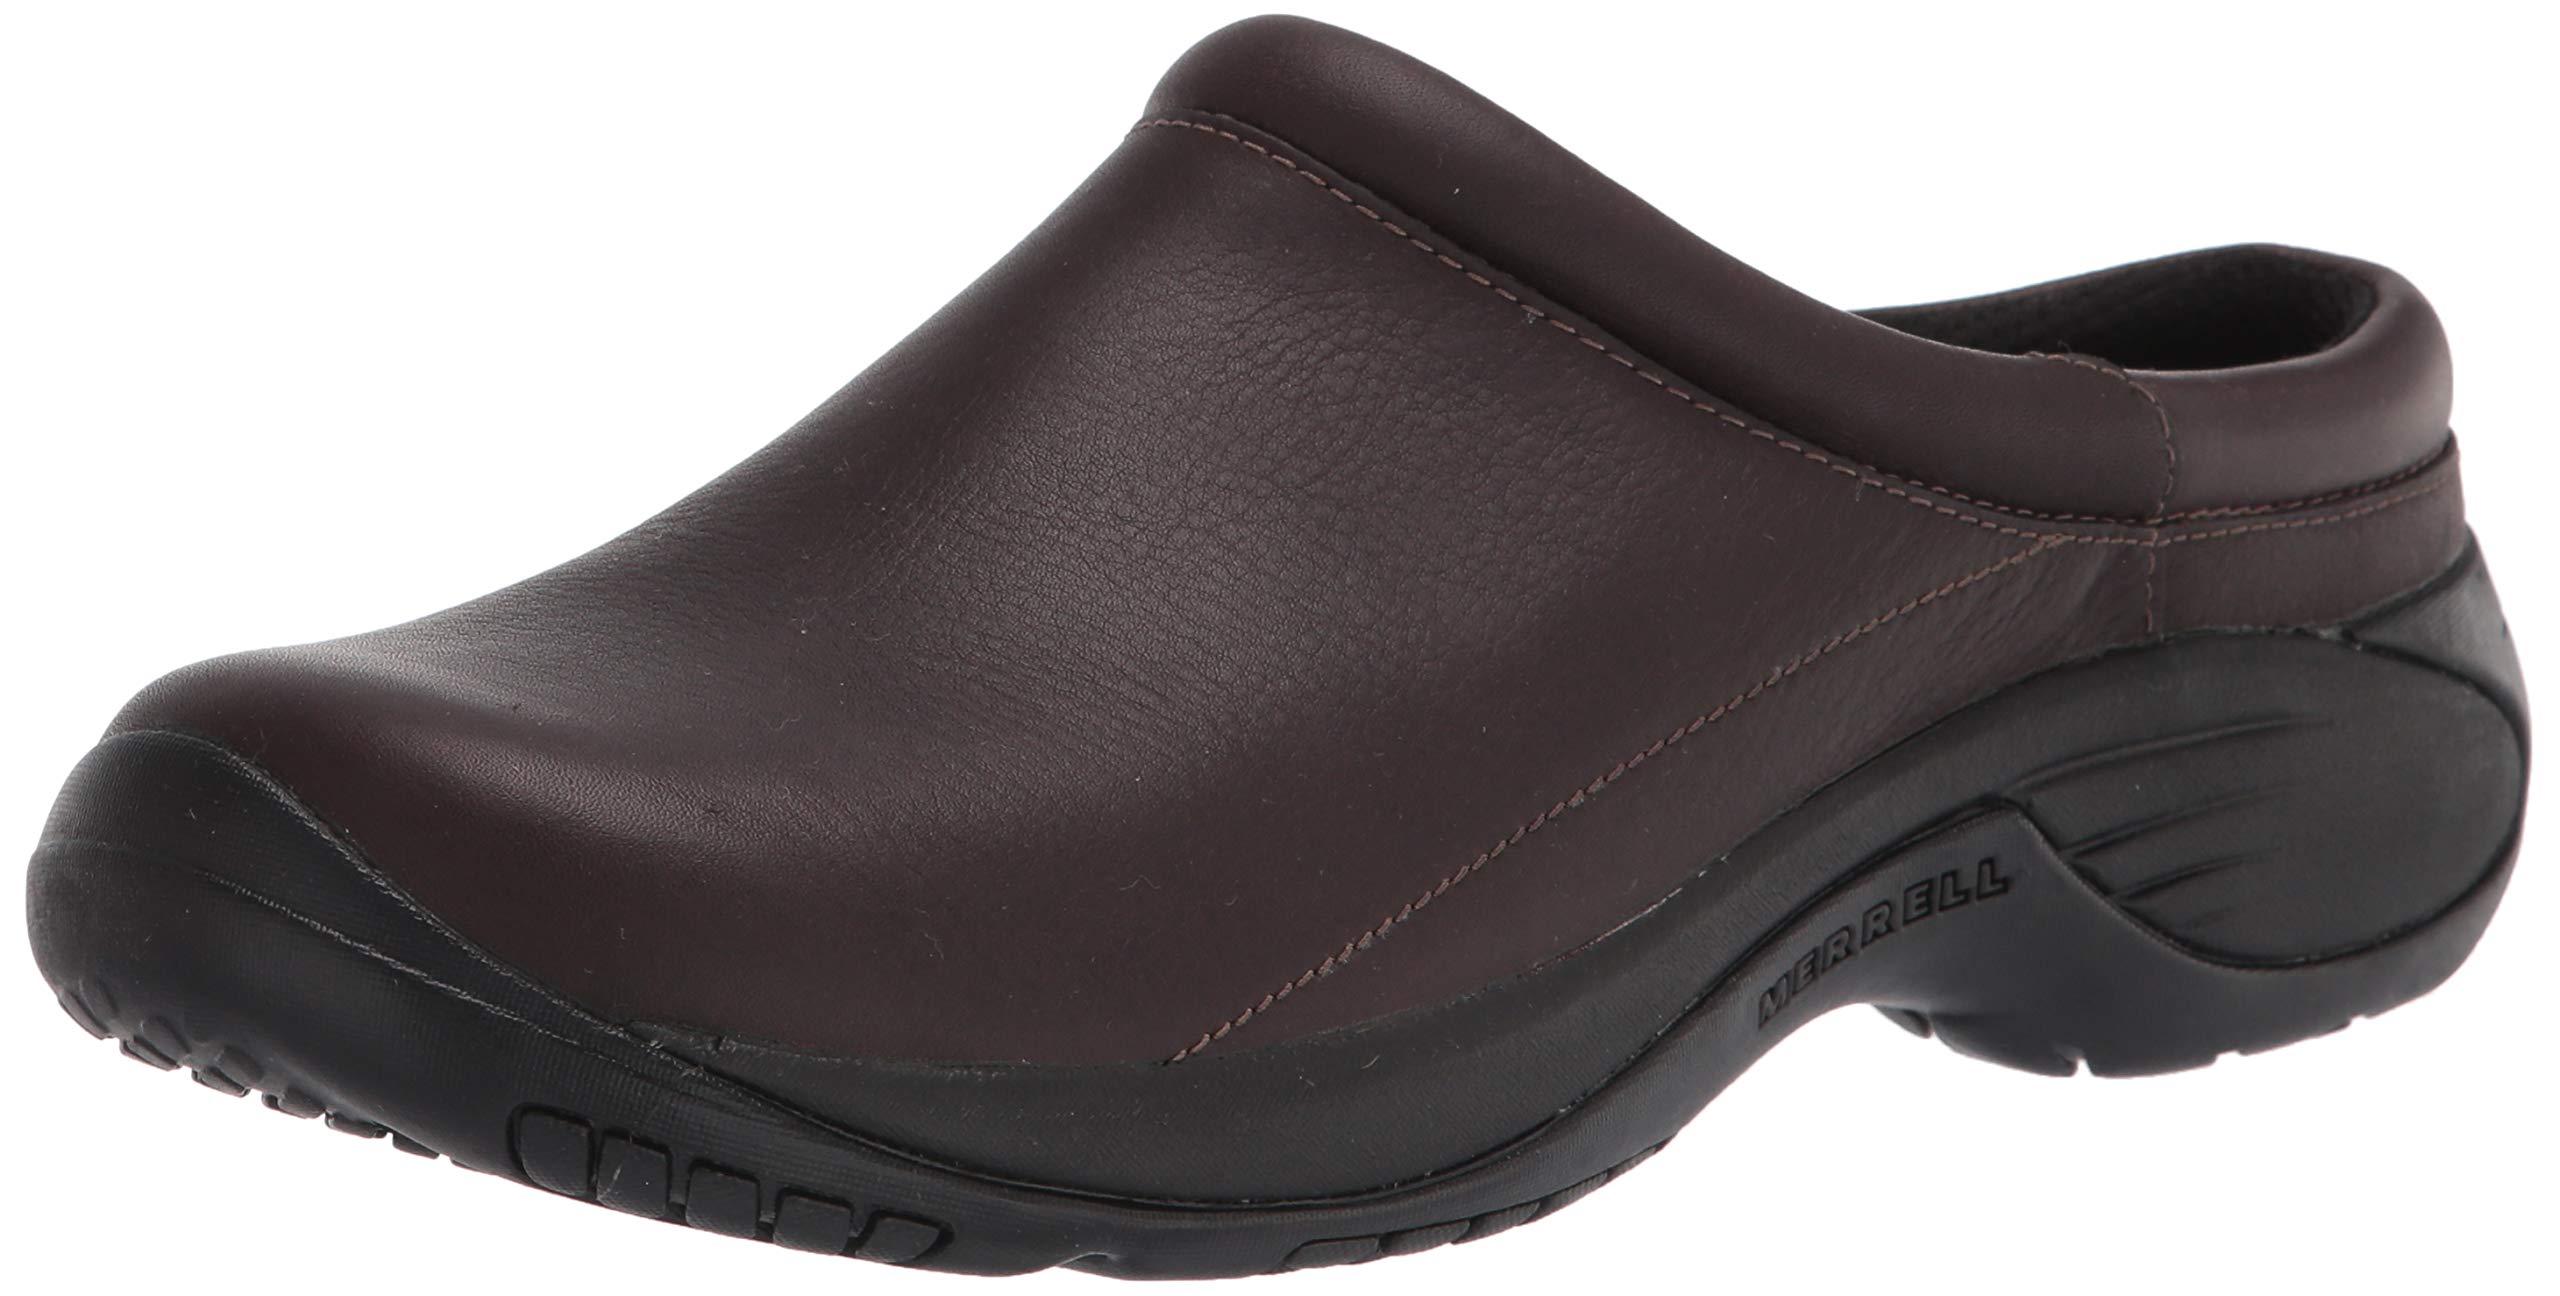 Merrell Leather Encore Gust 2 Moccasin in Espresso (Brown) for Men - Lyst